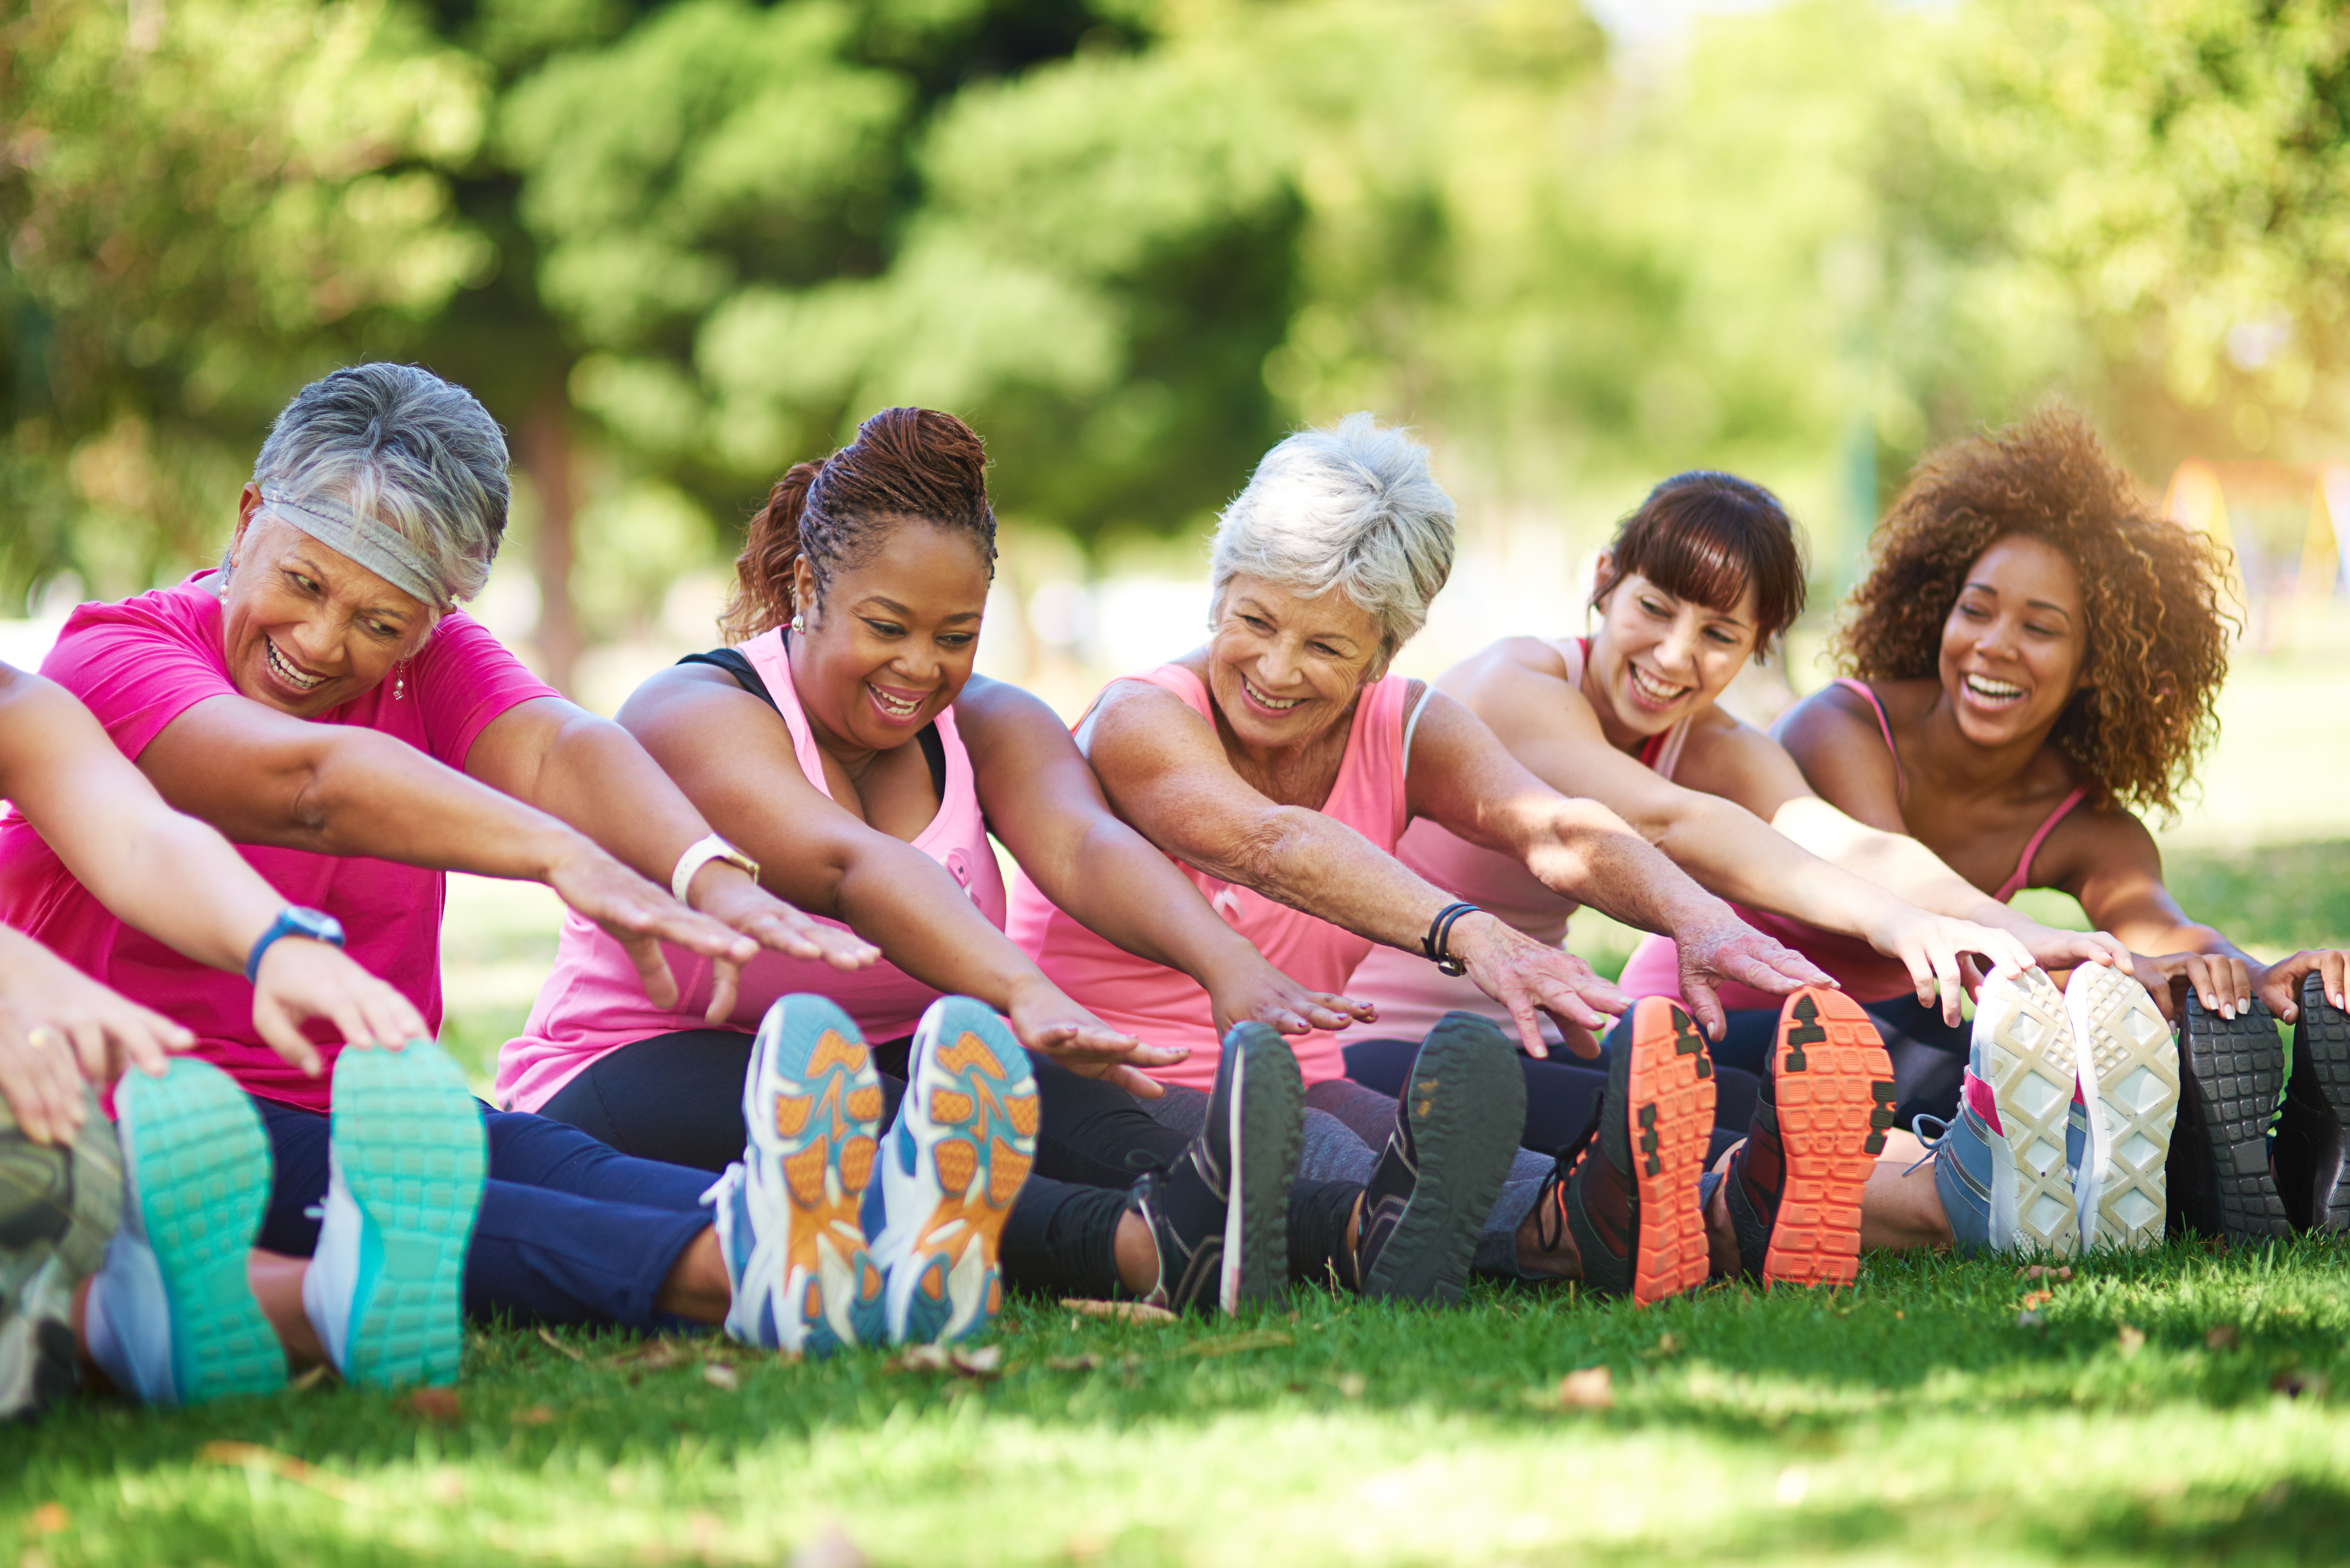 Group of older women stretching on grass, smiling